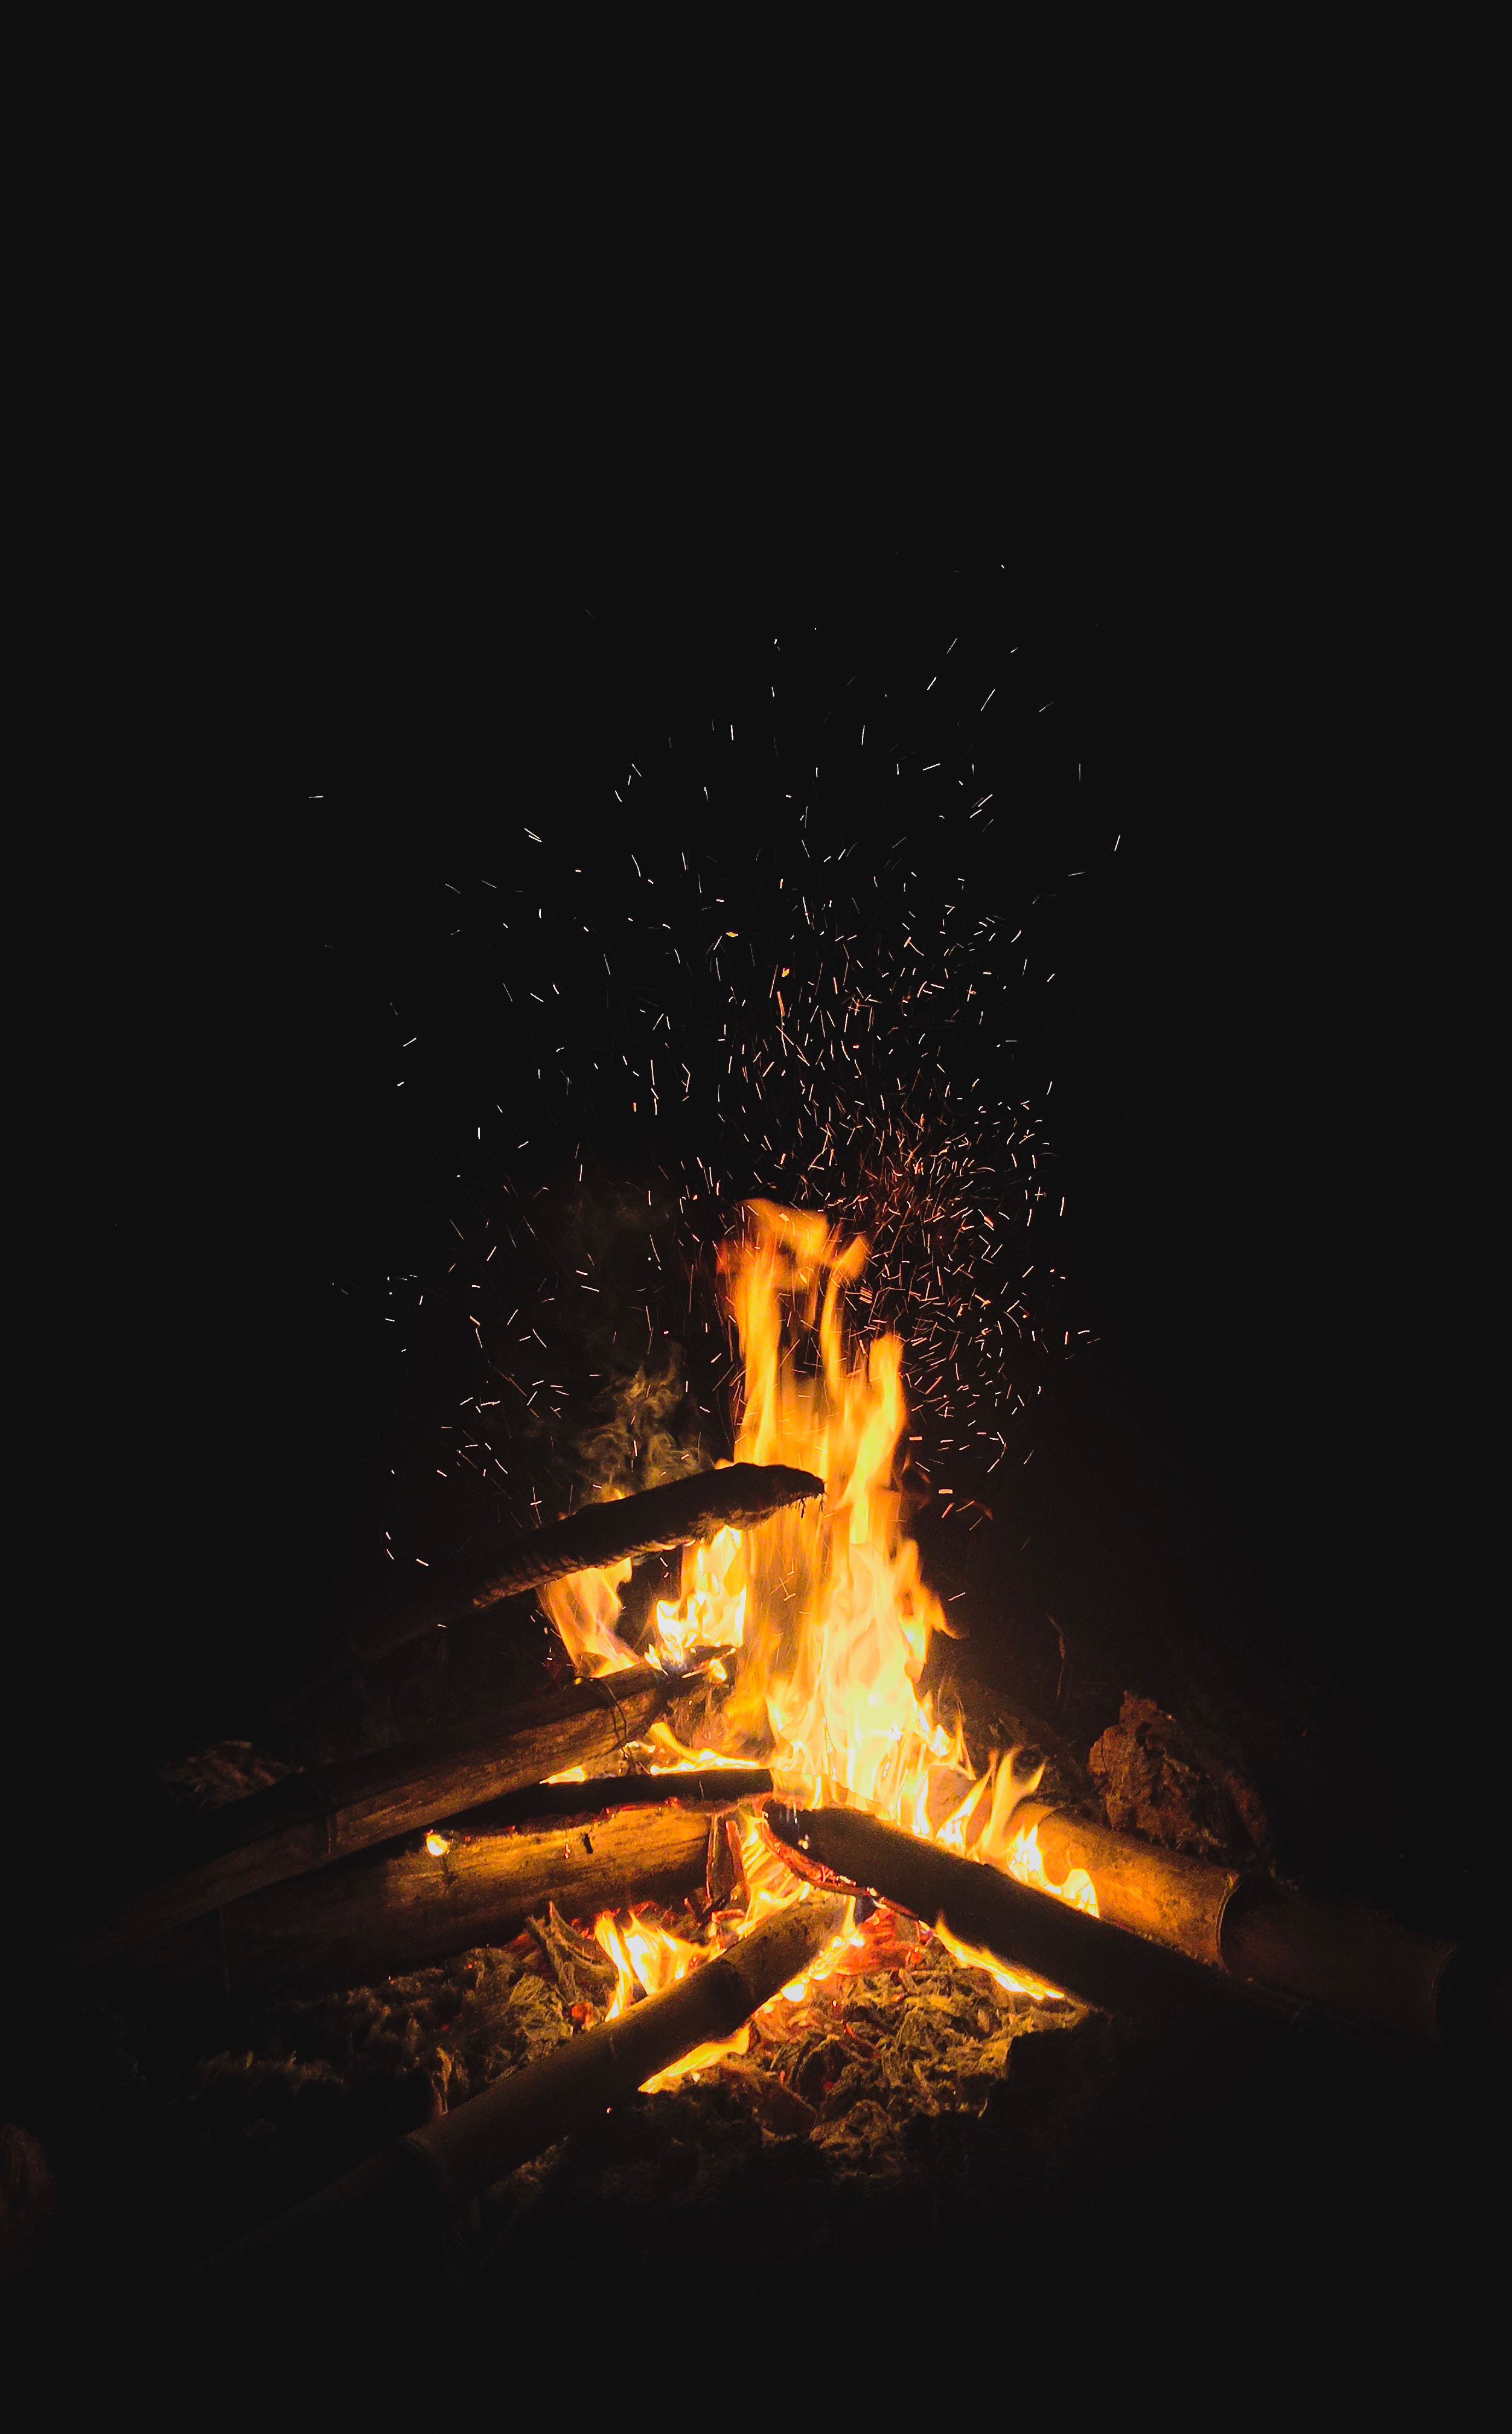 android flame, fire, bonfire, dark, sparks, firewood